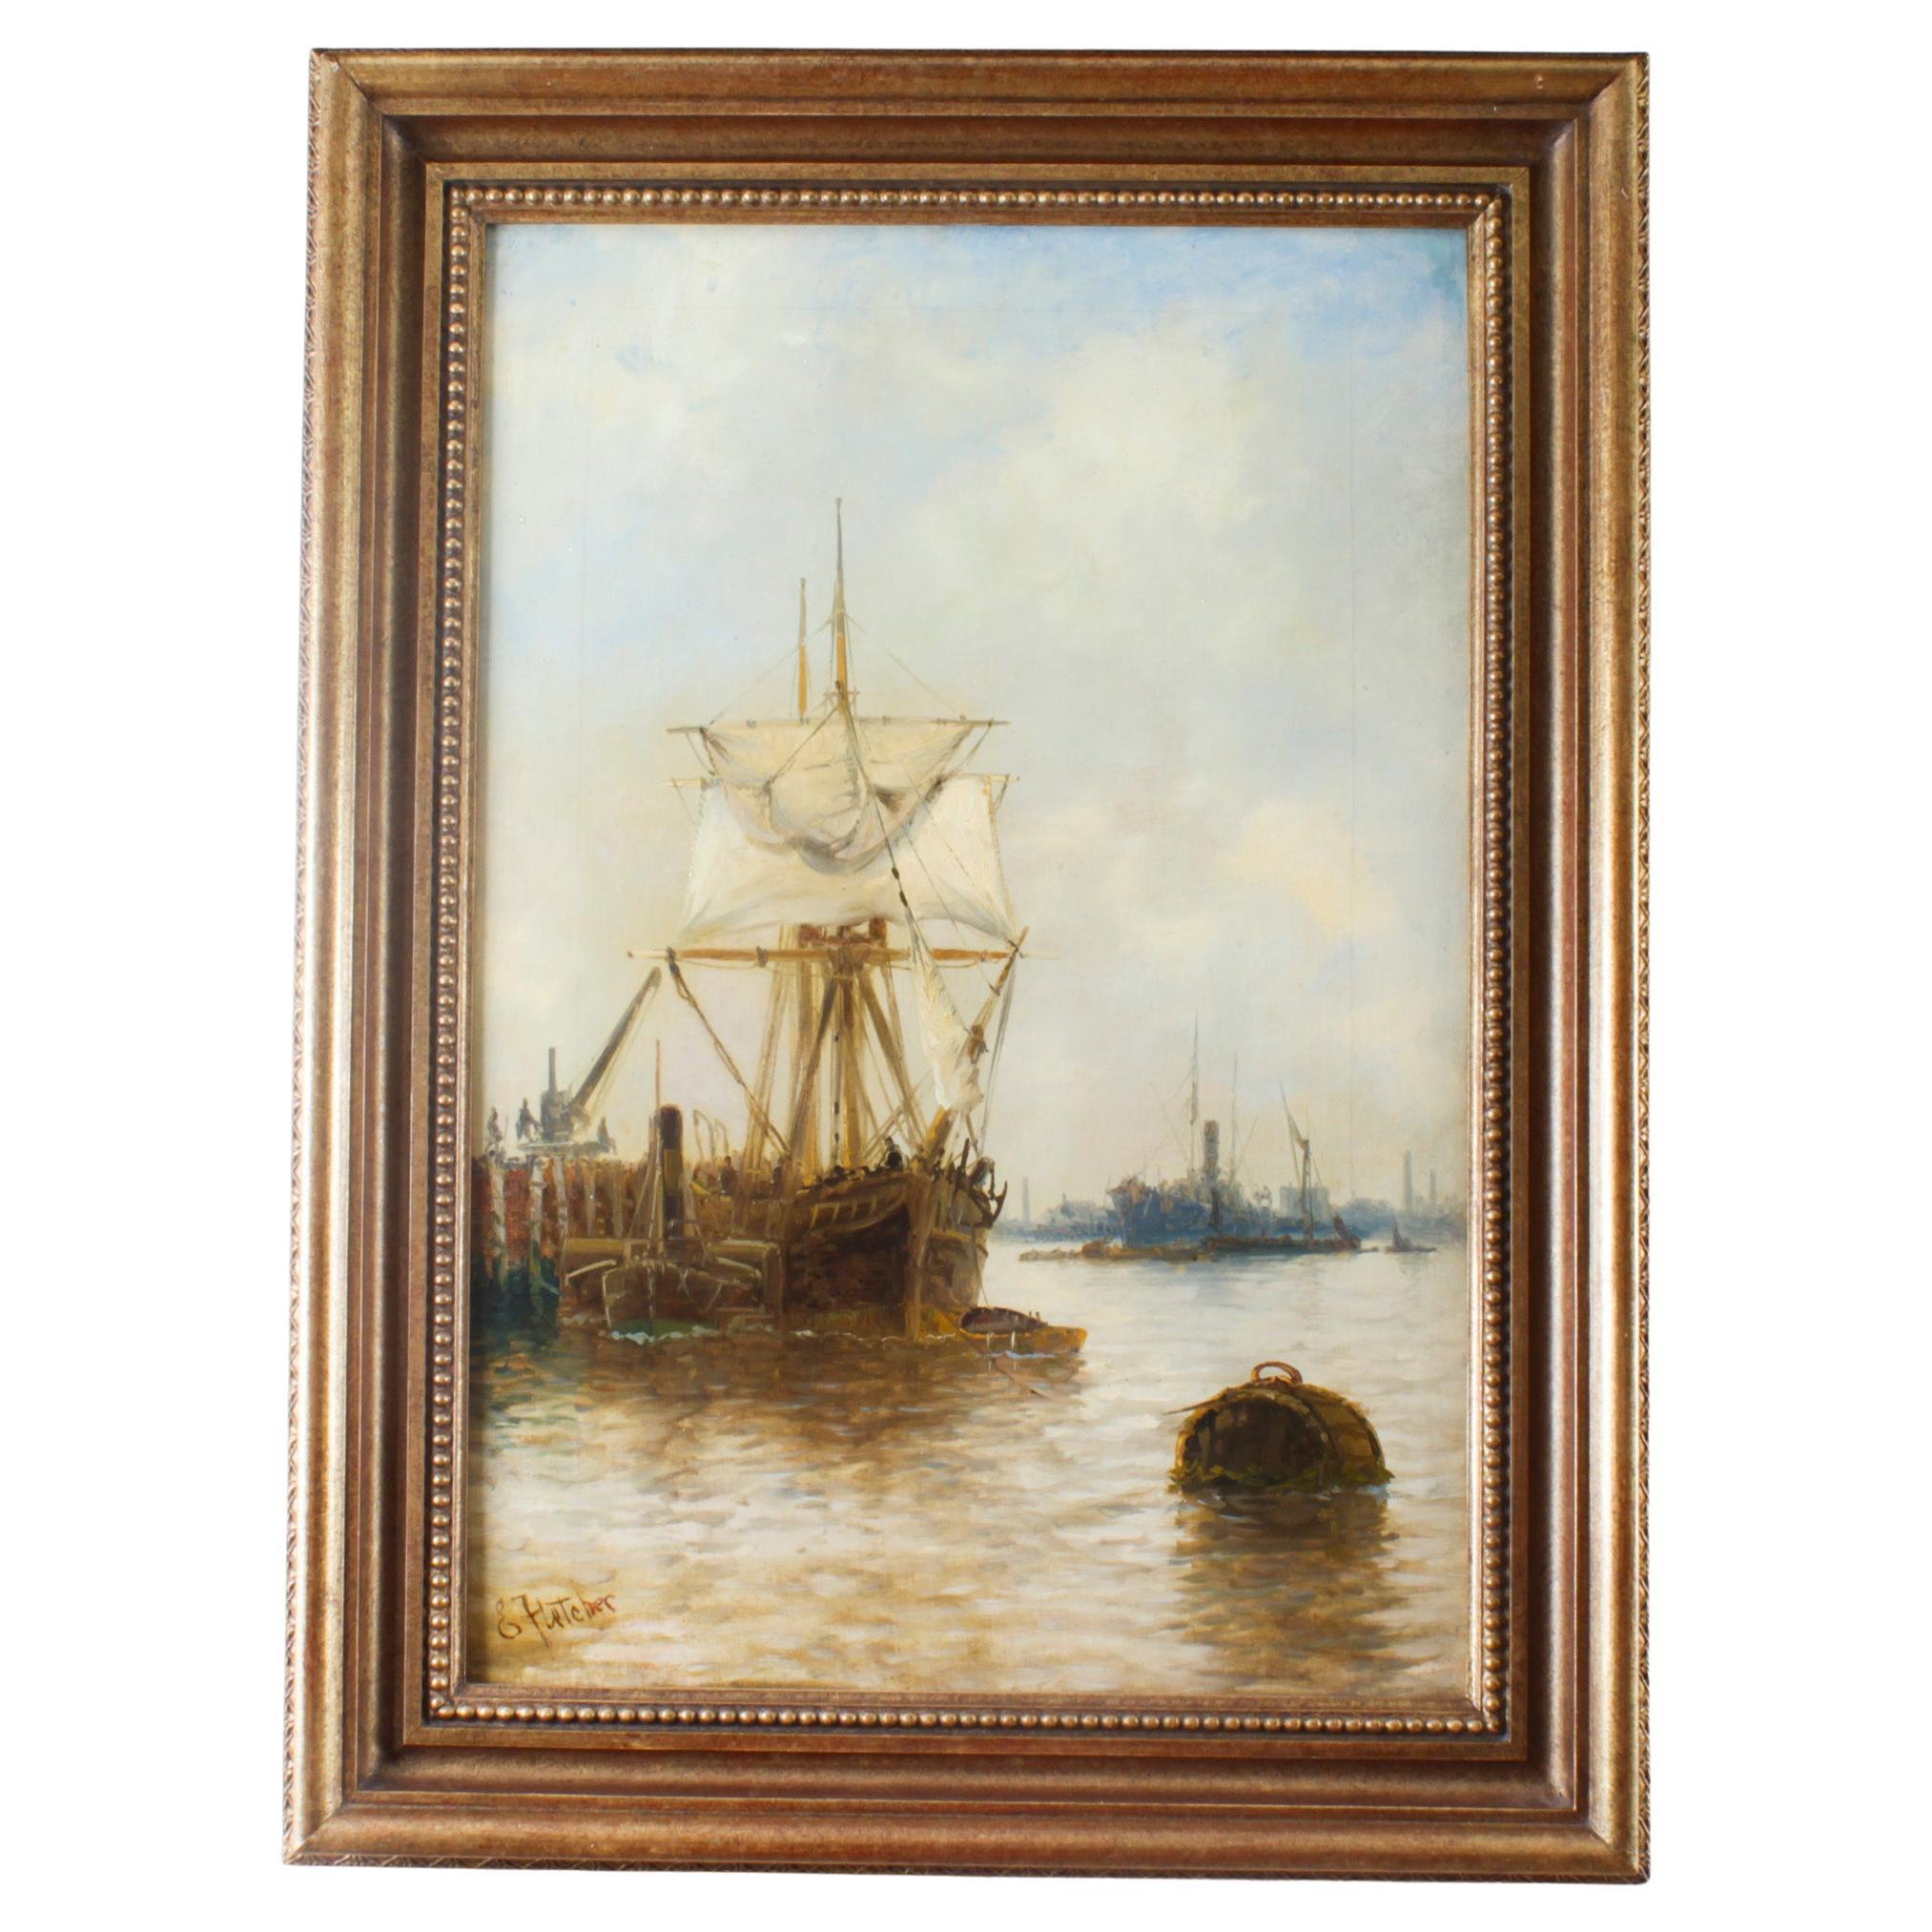 Antique English Oil on Canvas Painting of a River Scene Edward Fletcher 19th C For Sale